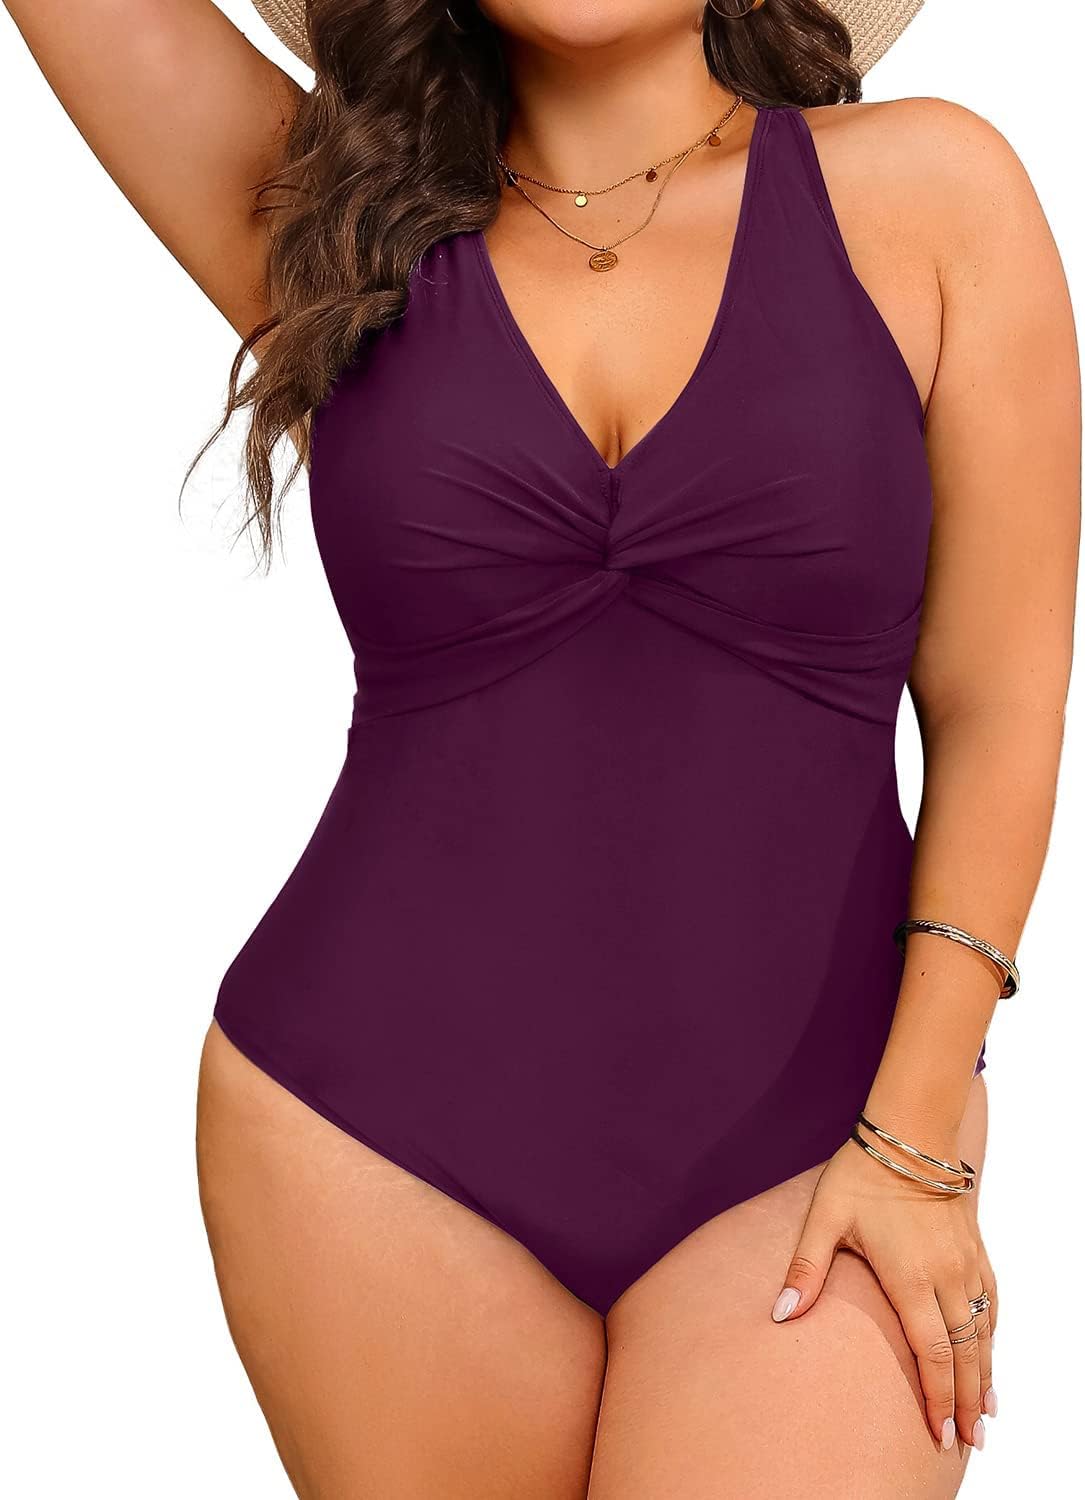 Womens Plus Swimsuits in Womens Swimsuits 